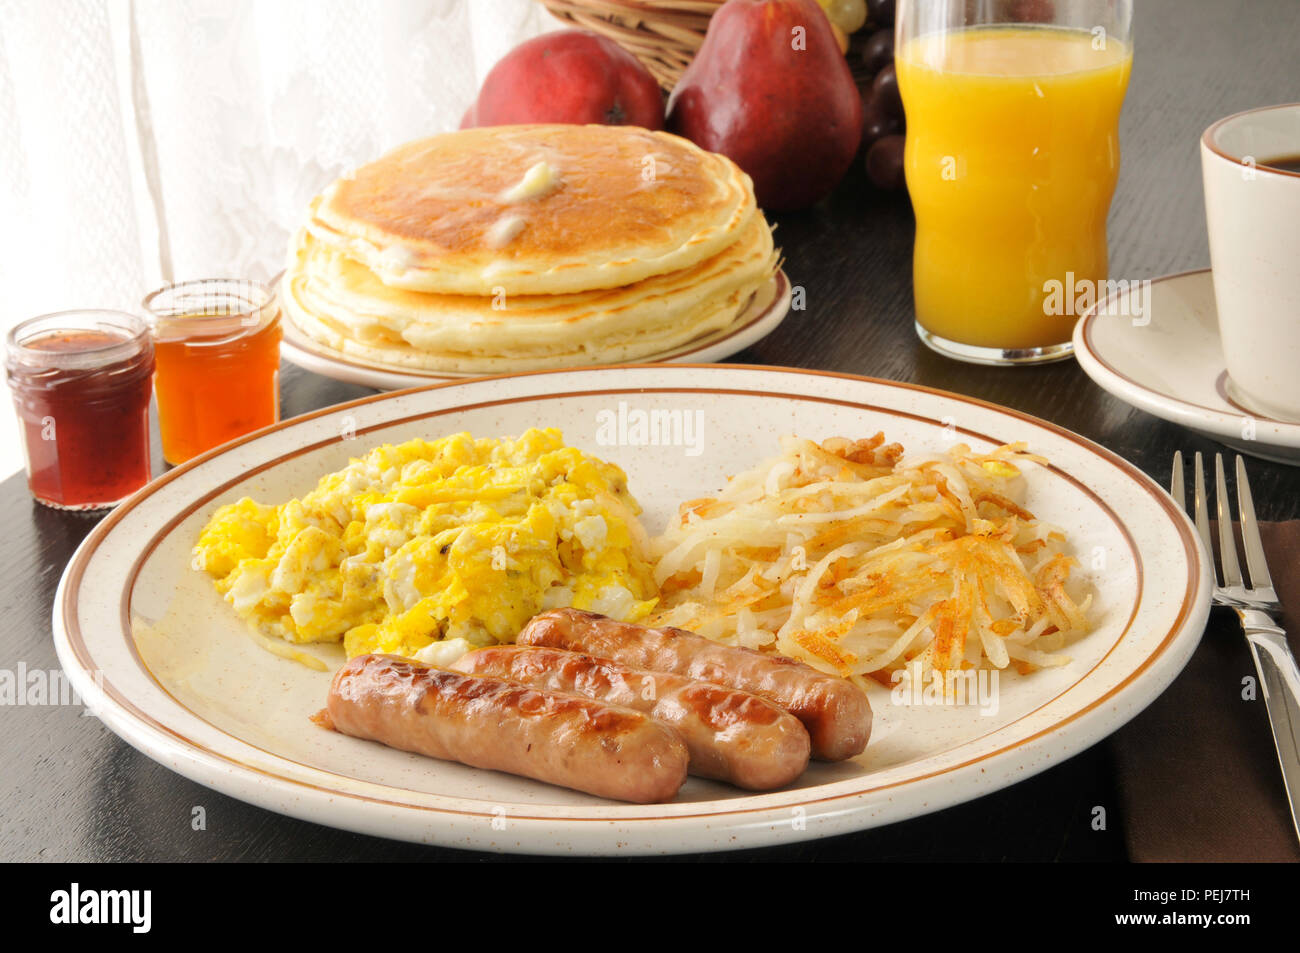 Sausage and scrambled eggs with hash browns and pancakes Stock Photo ...